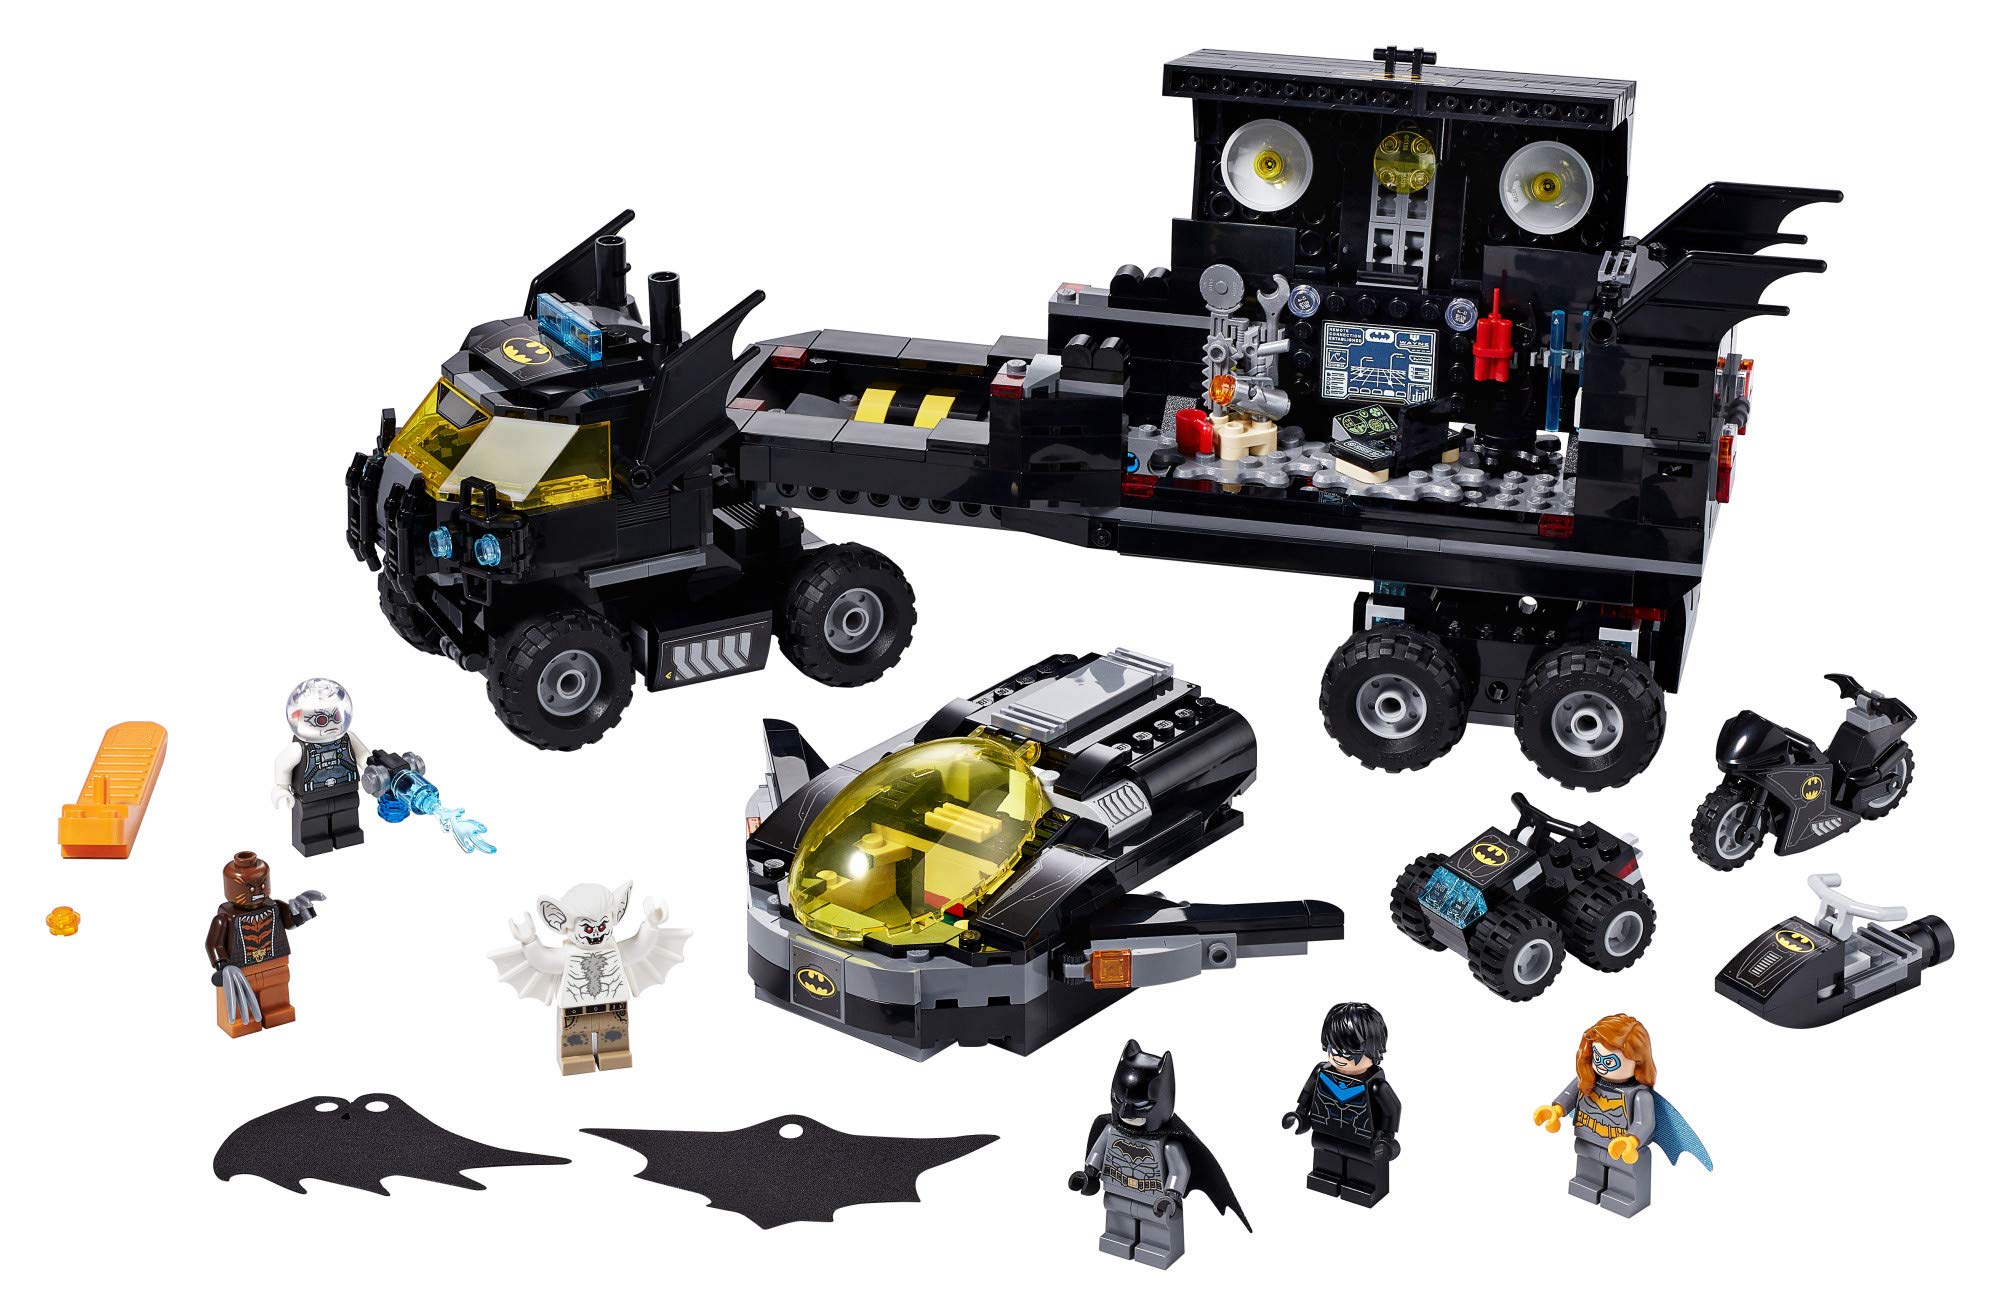 LEGO DC Mobile Bat Base 76160 Batman Building Toy, Gotham City Batcave Playset and Action Minifigures, Great ‘Build Your Own Truck’ Batman Gift for Kids Aged 6 and up (743 Pieces)